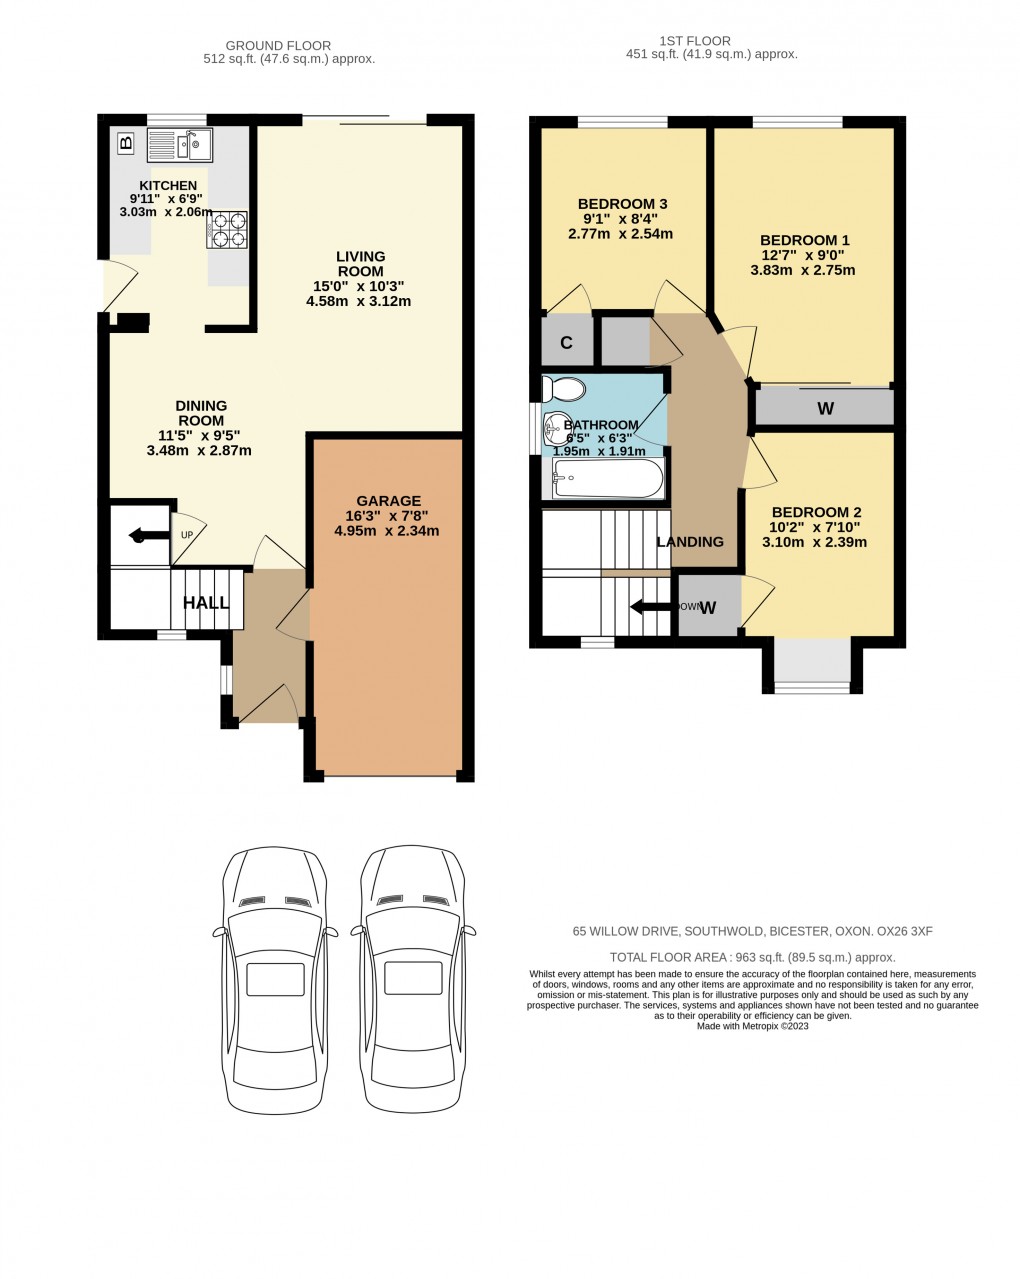 Floorplan for Willow Drive, Bicester